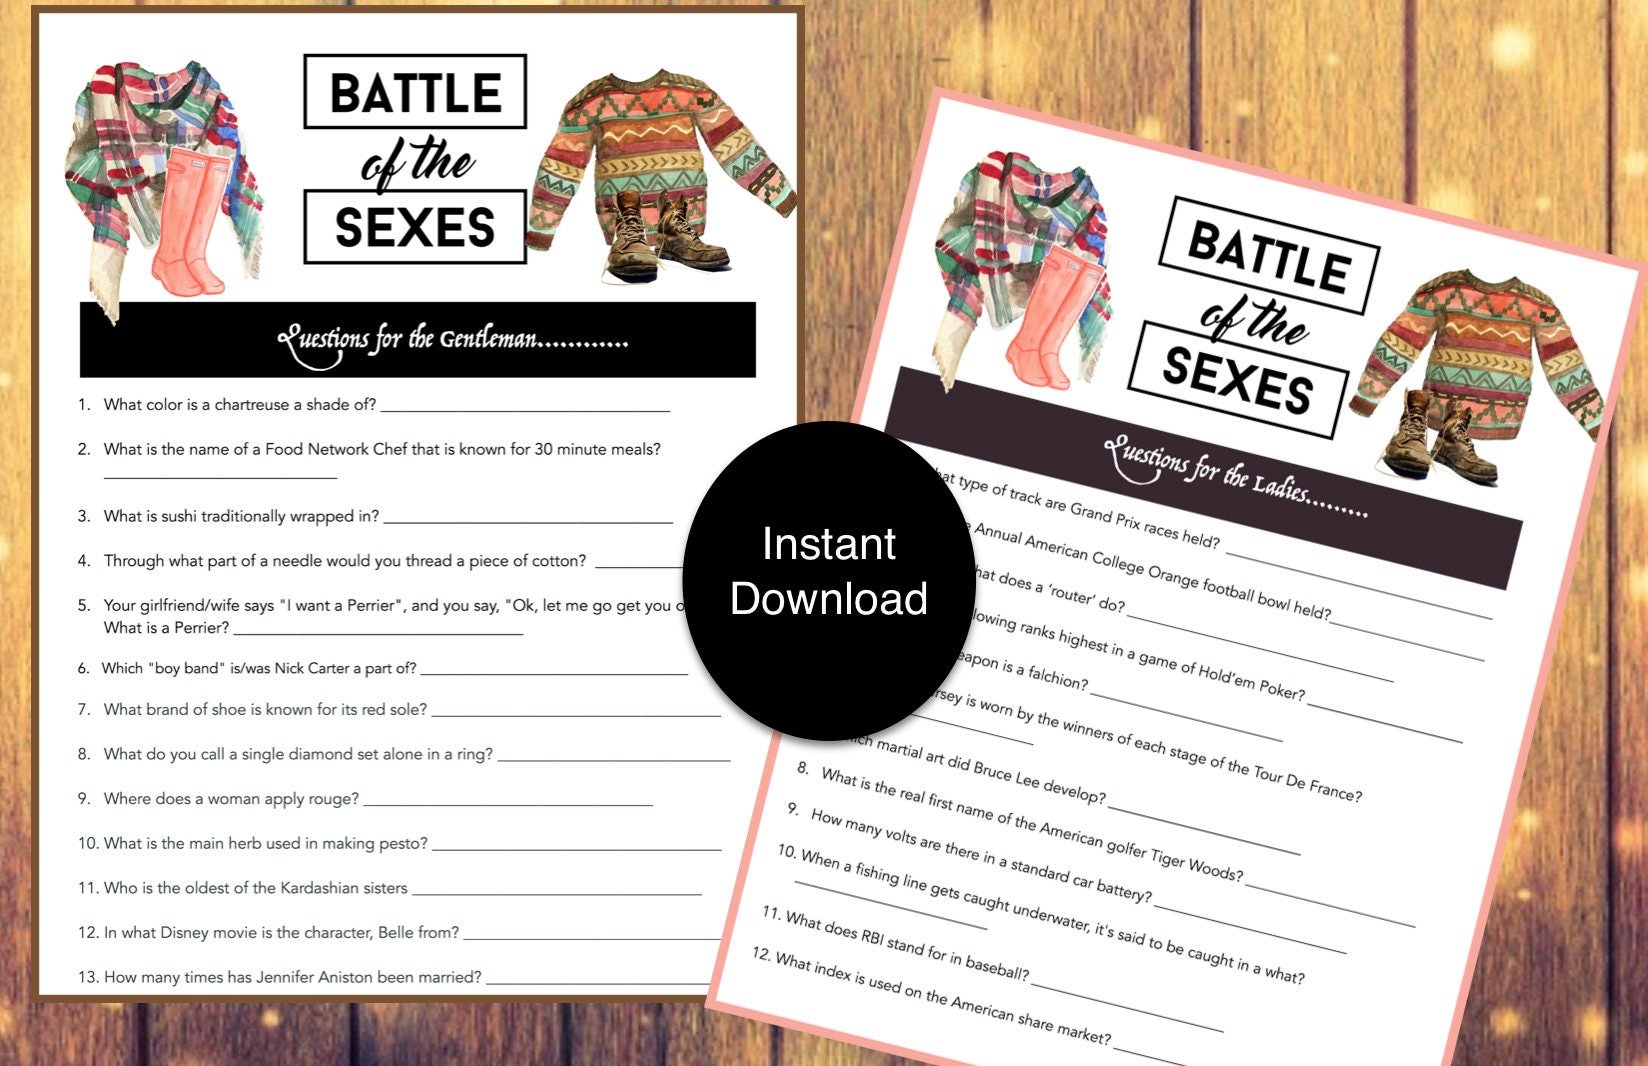 Battle of the Sexes Game – Easy Event Ideas